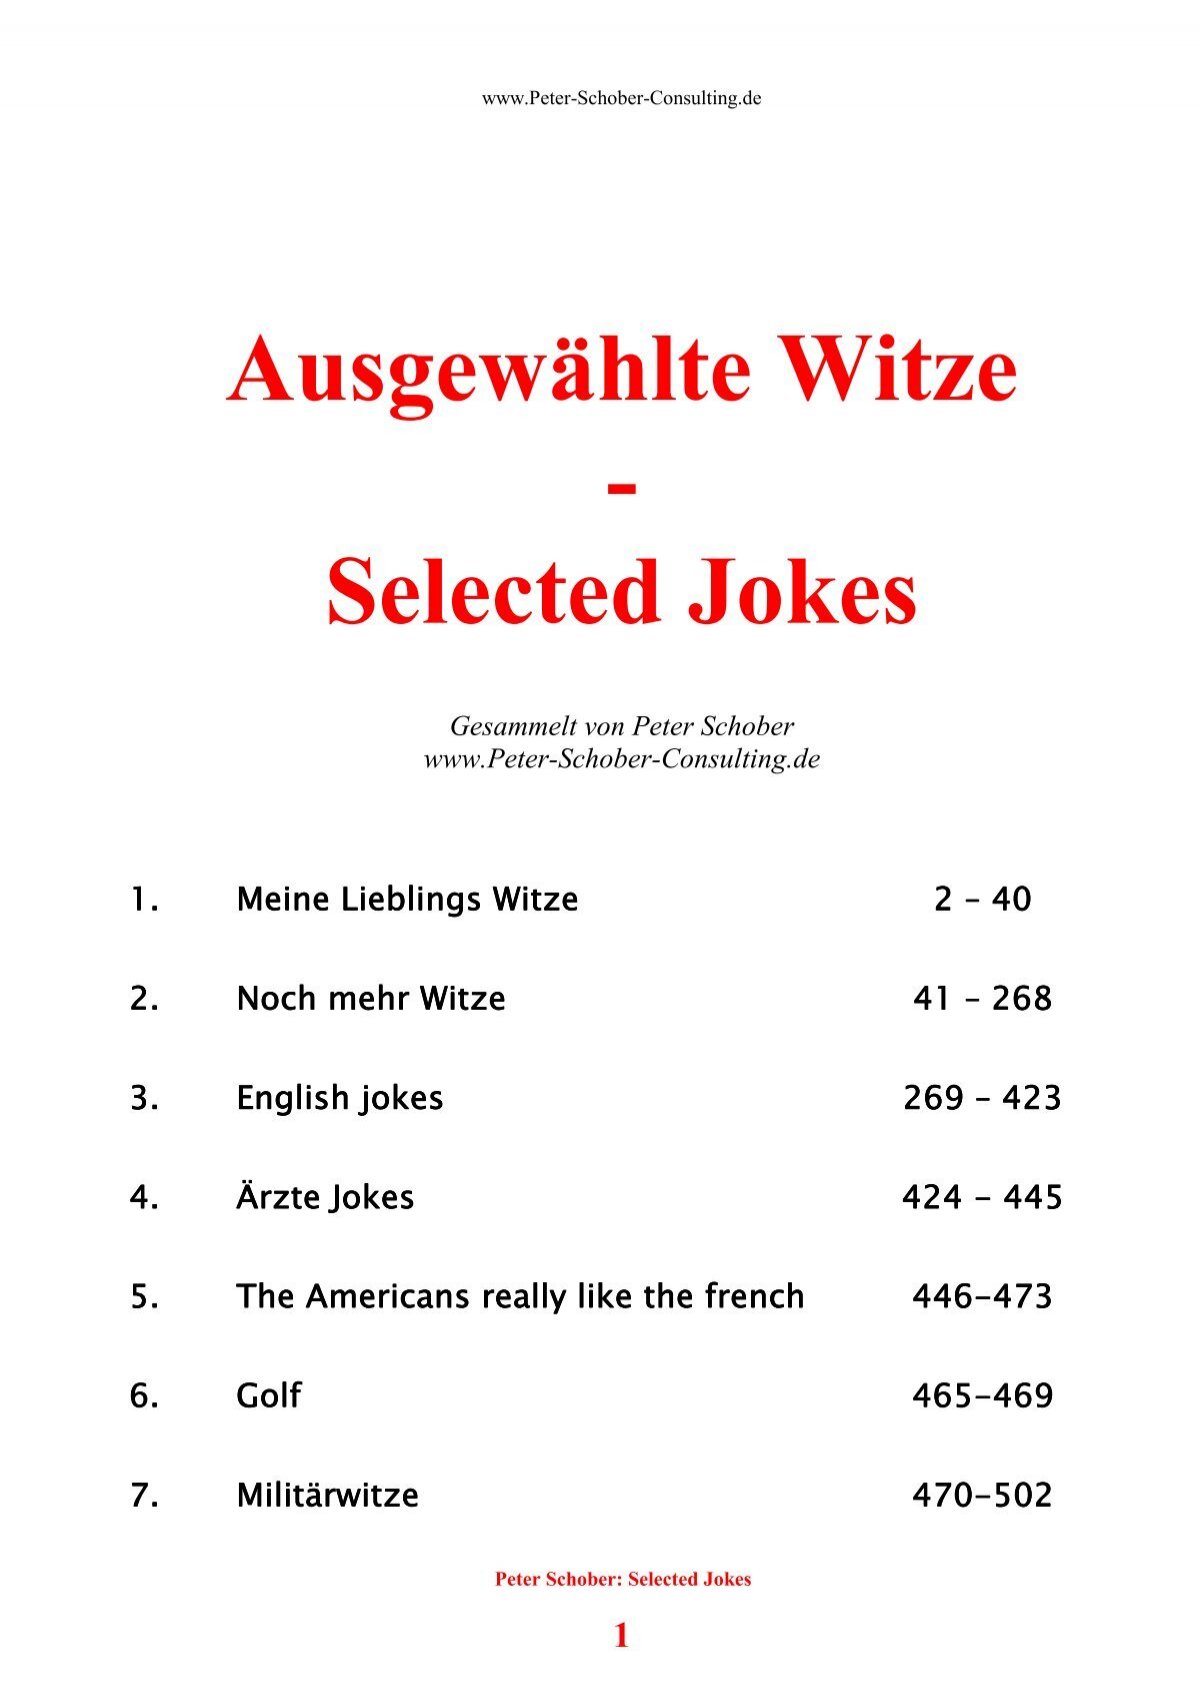 Ausgewählte Witze - Selected Jokes - Consulting.html - home